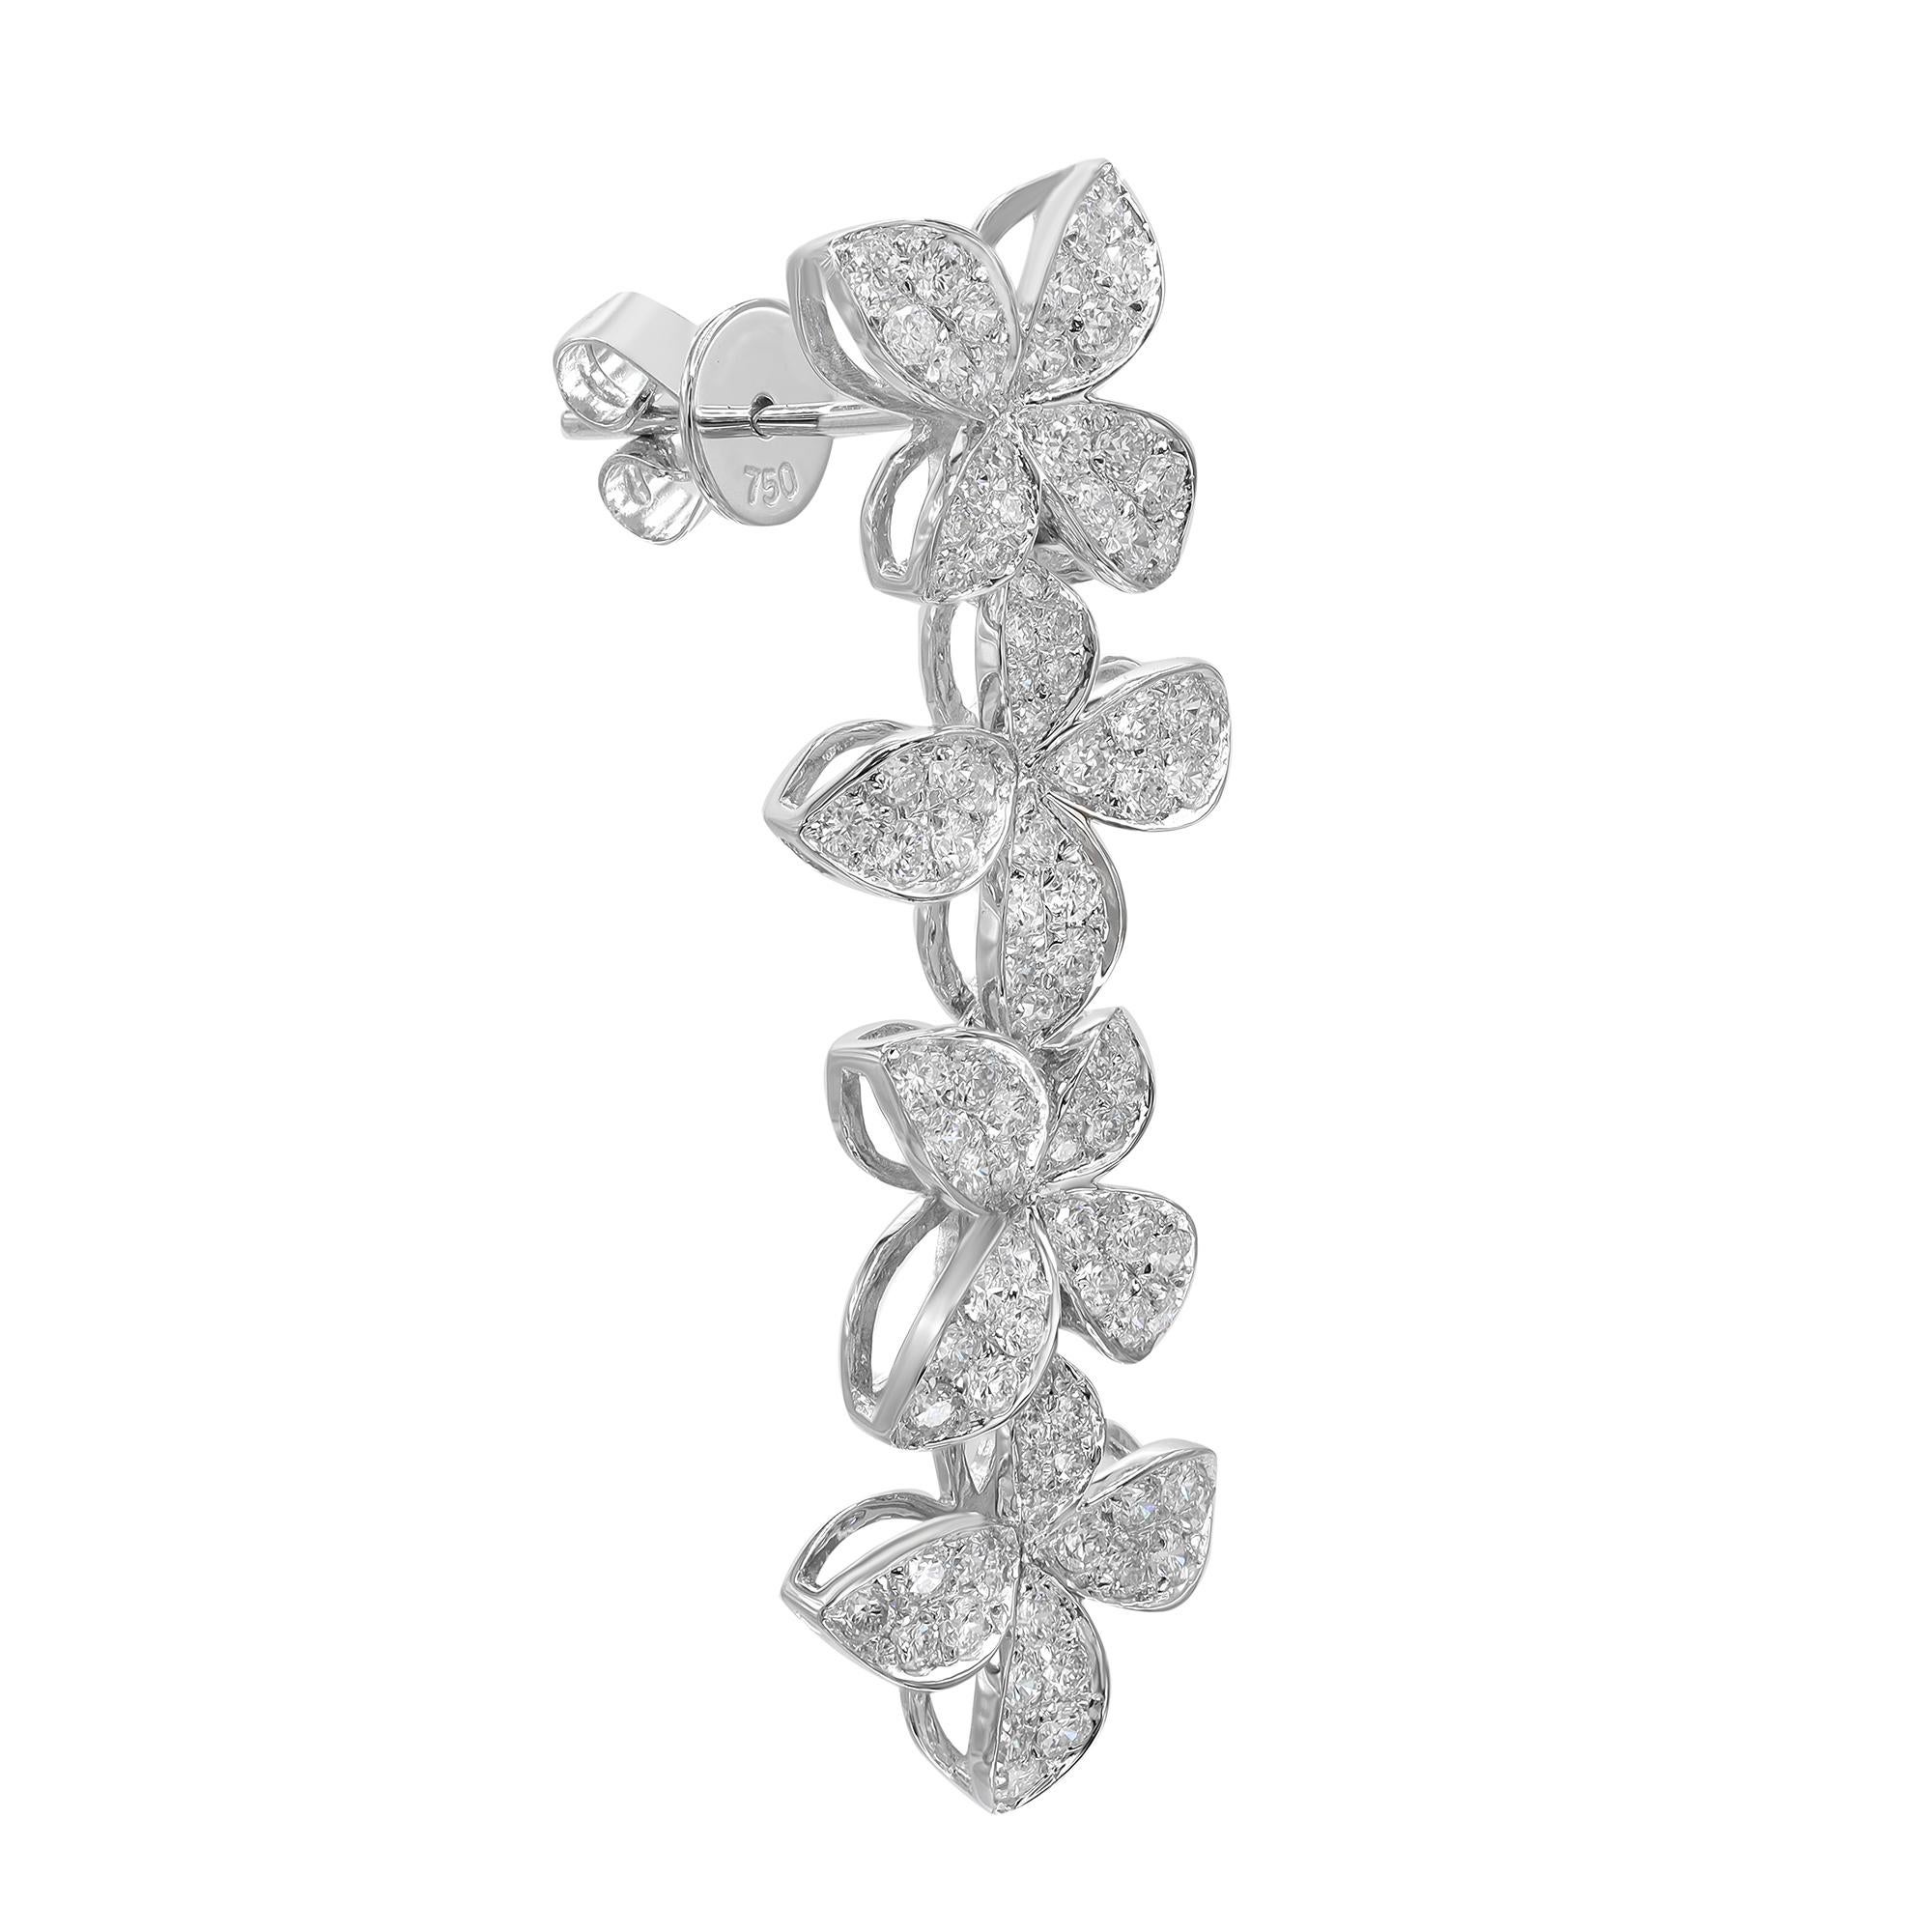 Modern Pave Set Round Cut Diamond Flower Drop Earrings 18K White Gold 1.91Cttw For Sale